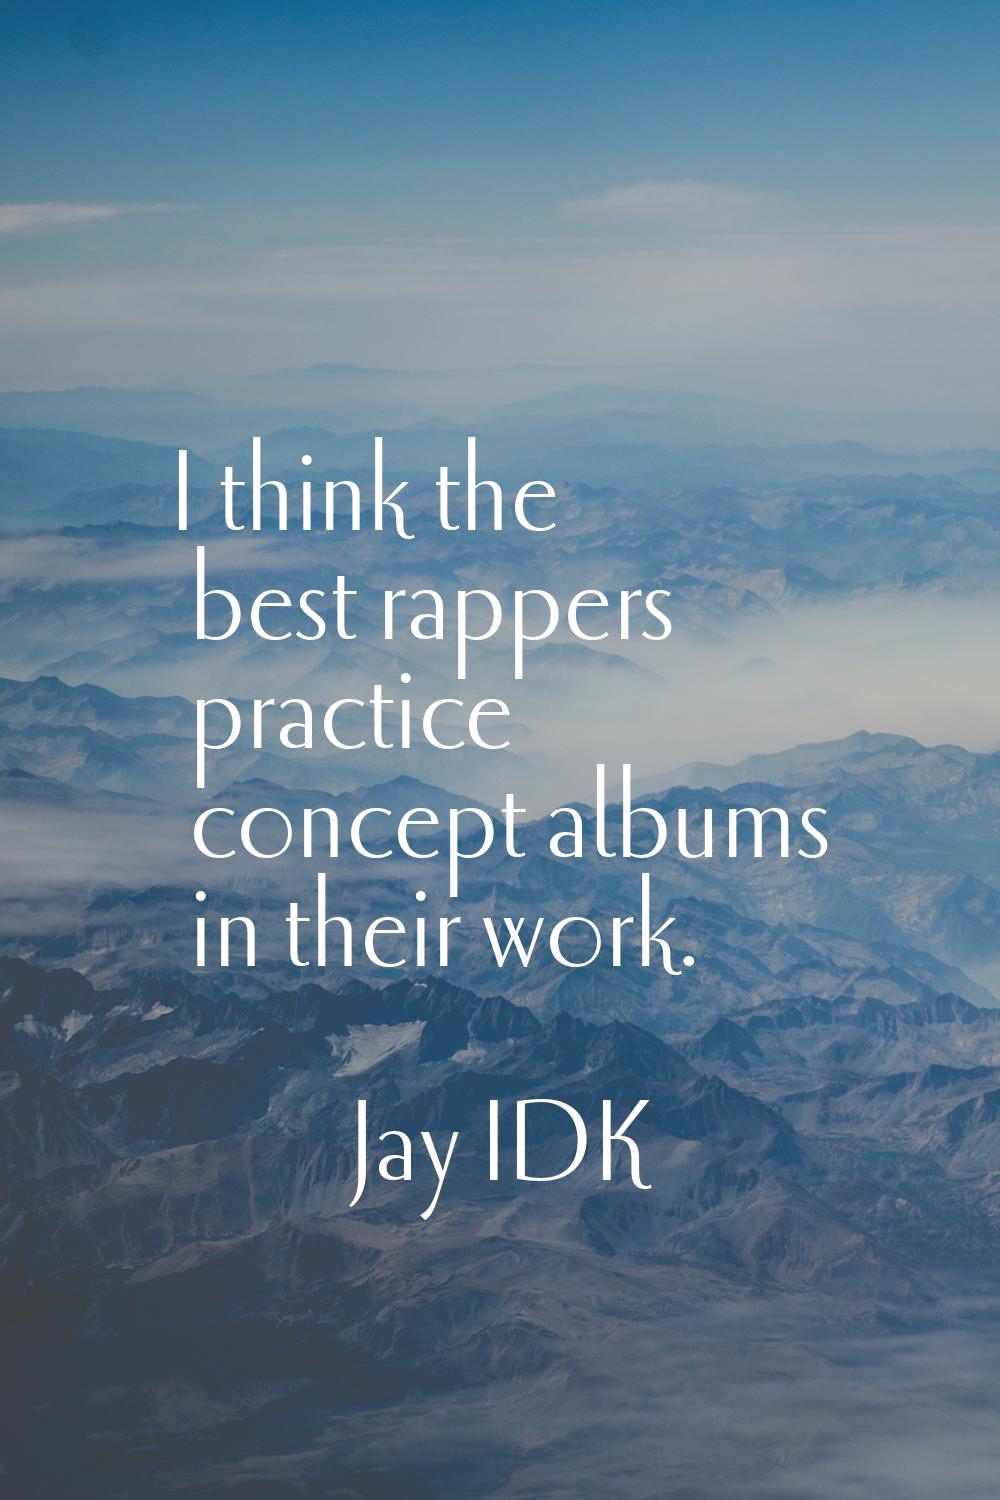 I think the best rappers practice concept albums in their work.